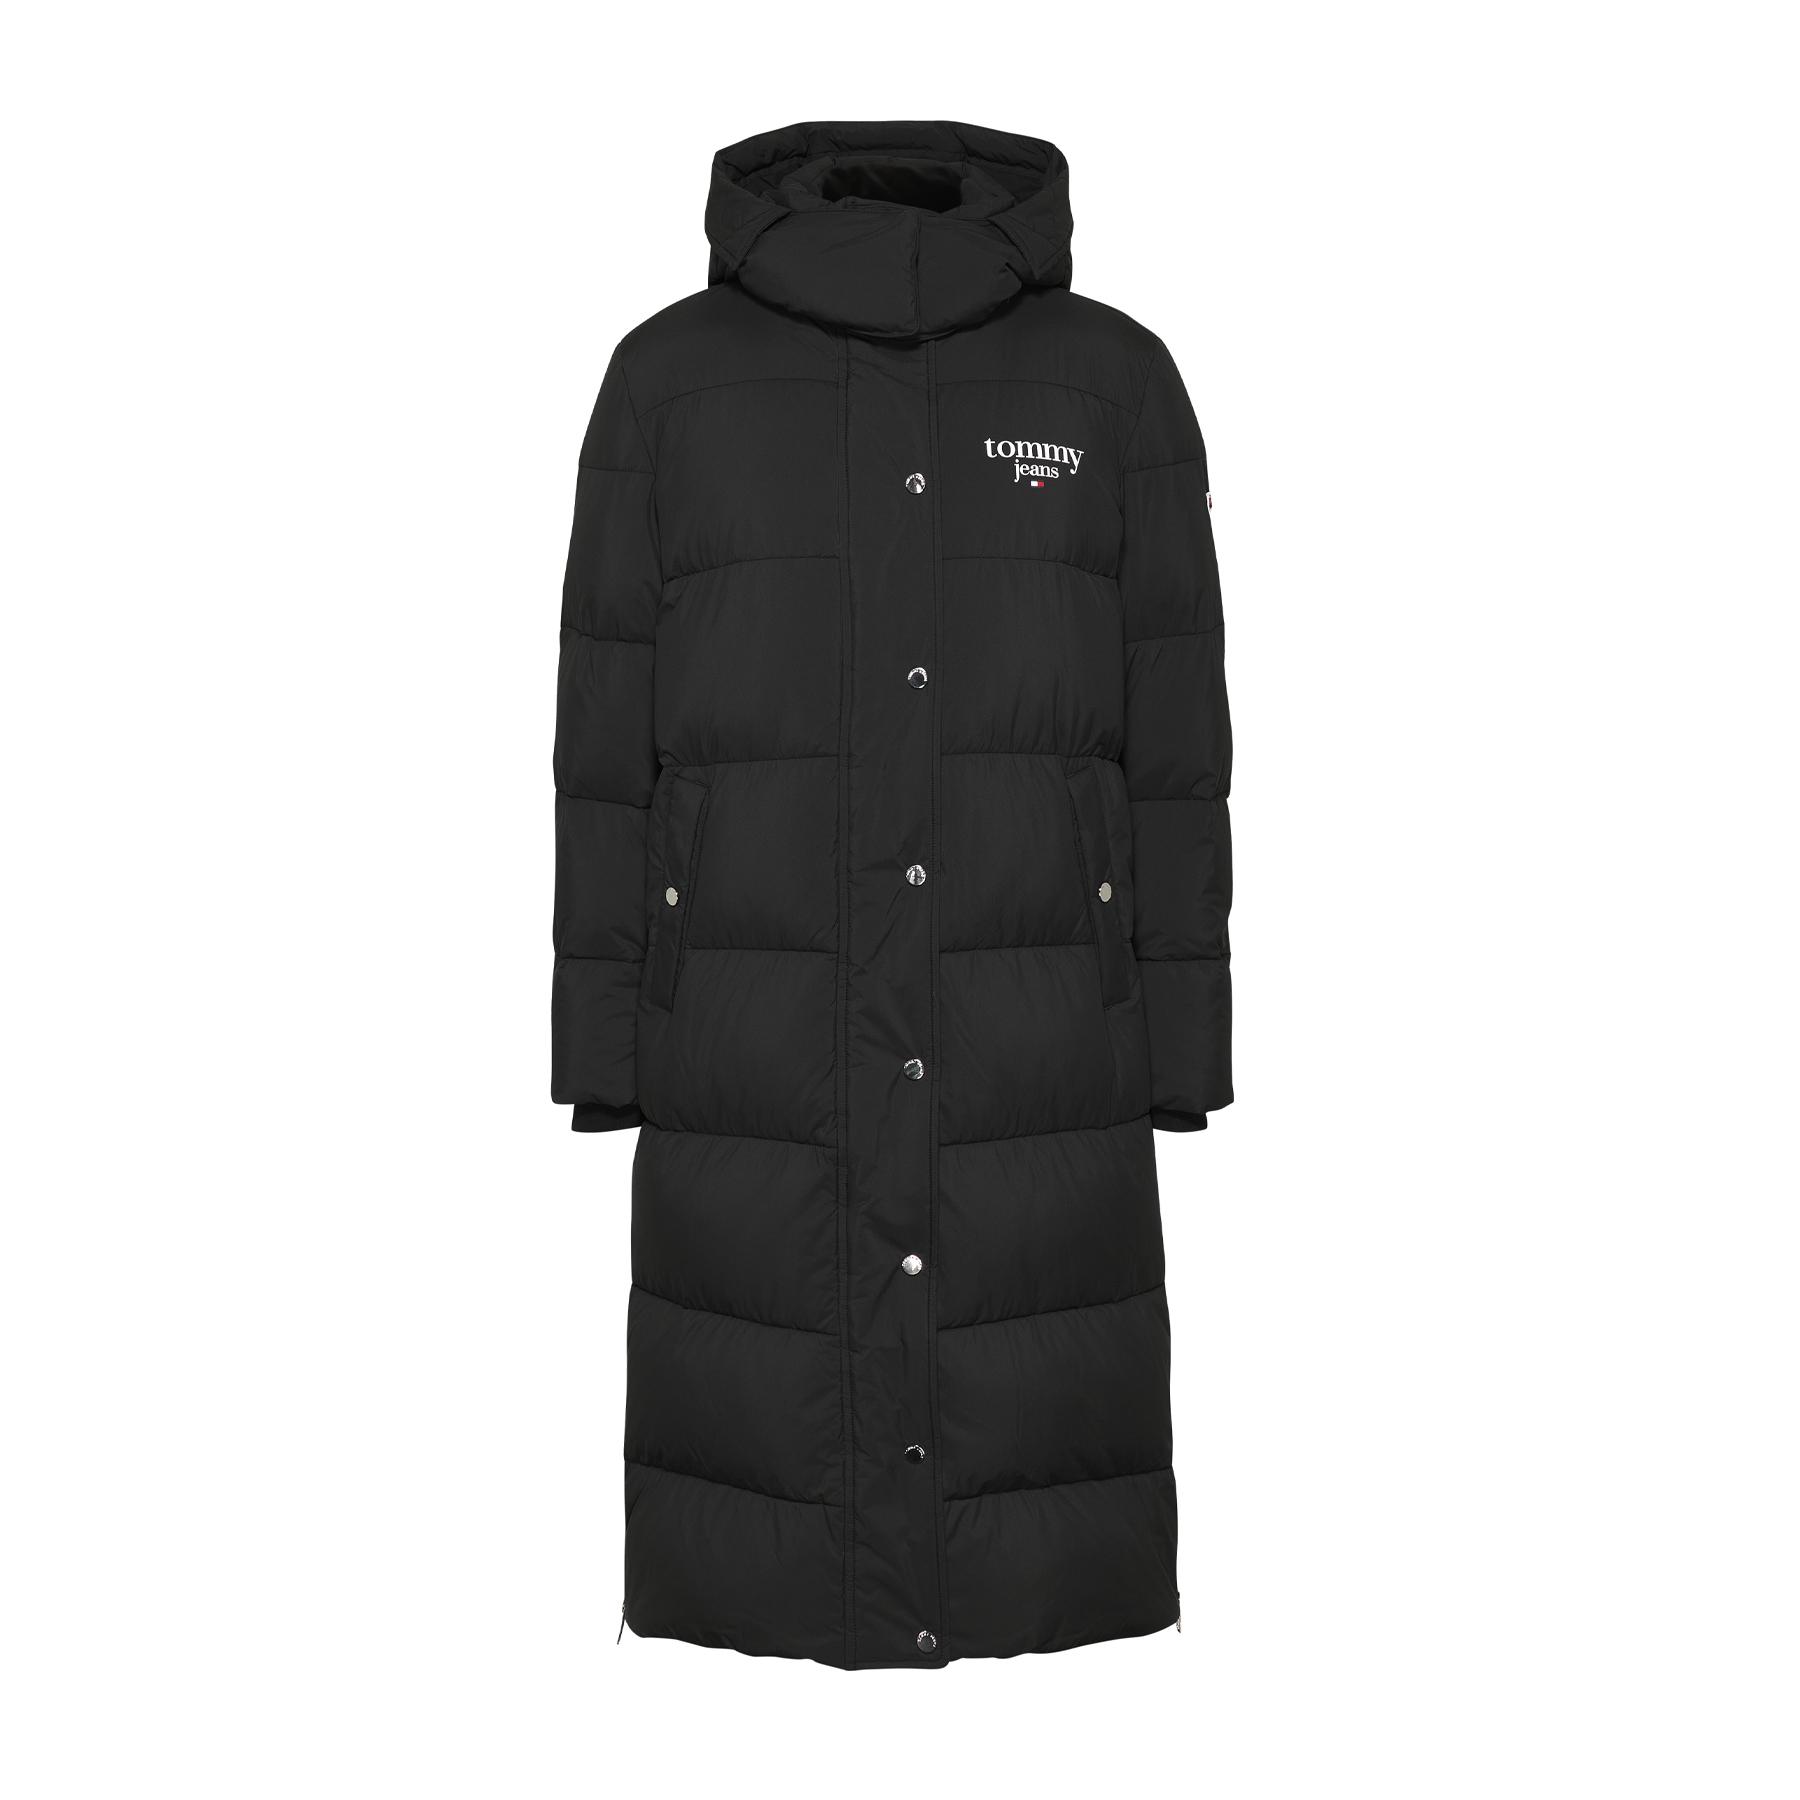 Tommy Hilfiger Graphic Longline Puffer Jacket in Black | Lyst